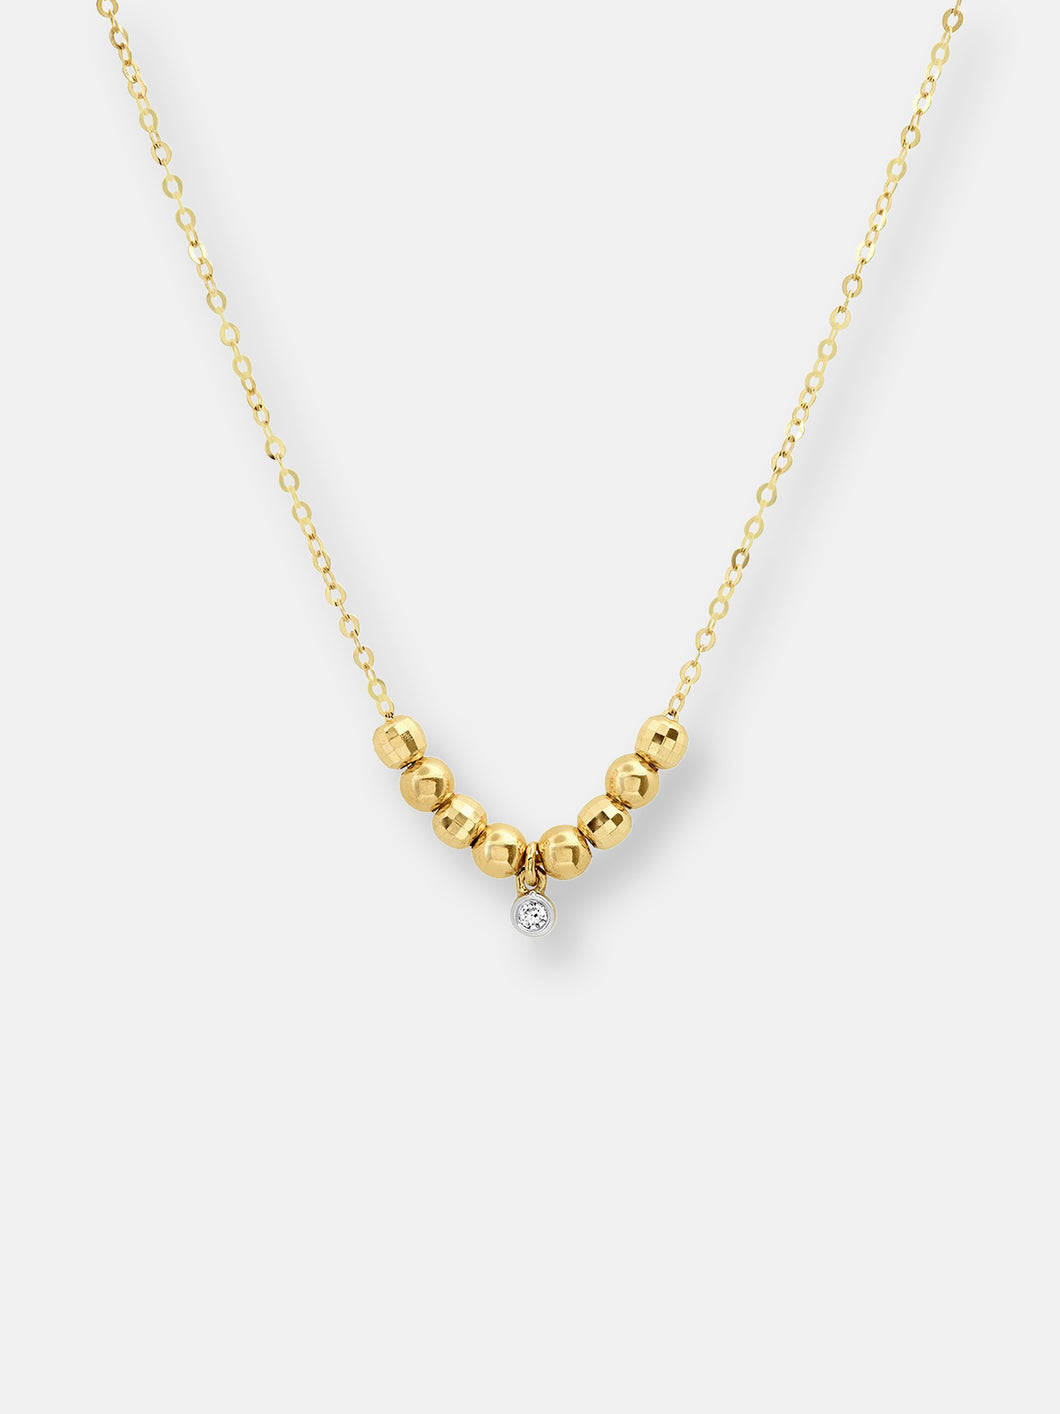 14K Yellow Gold Bead Necklace With Diamond Drop